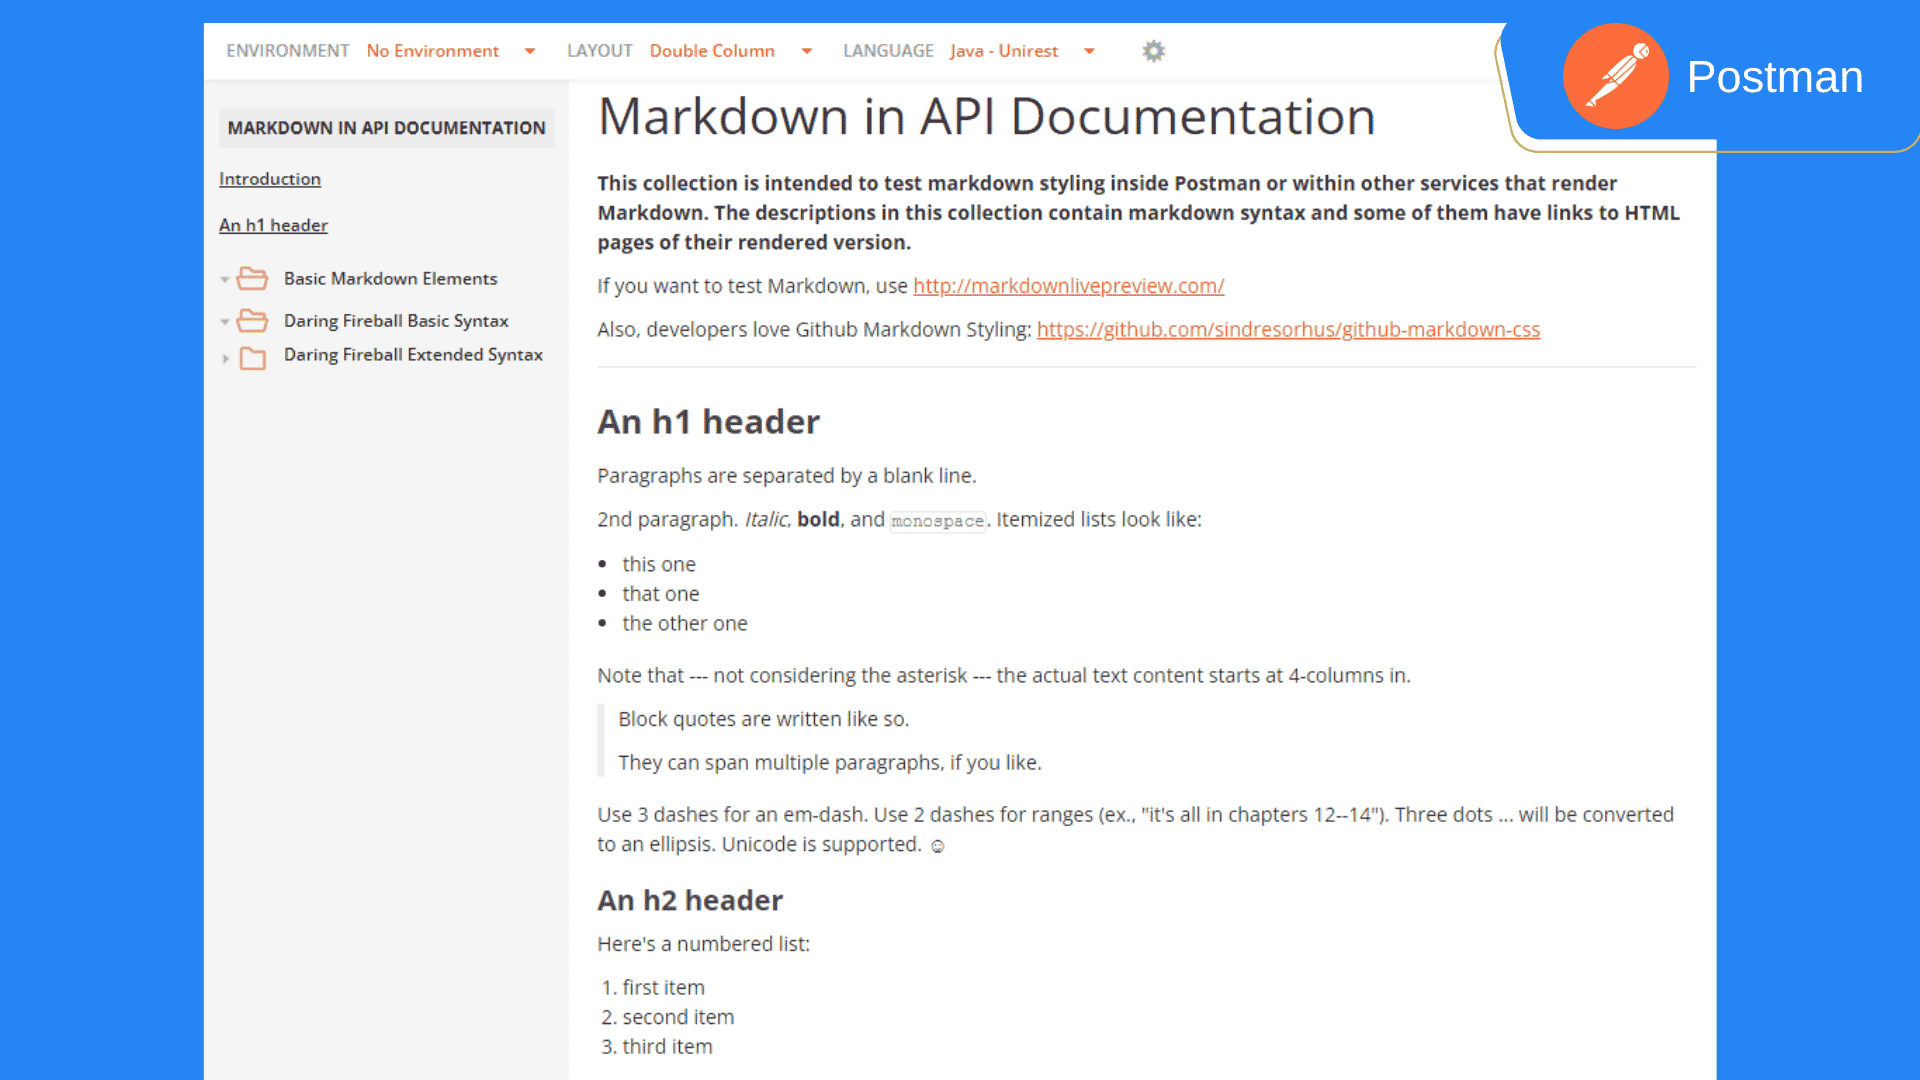 Use of Markdown in API documentation - Best Practices